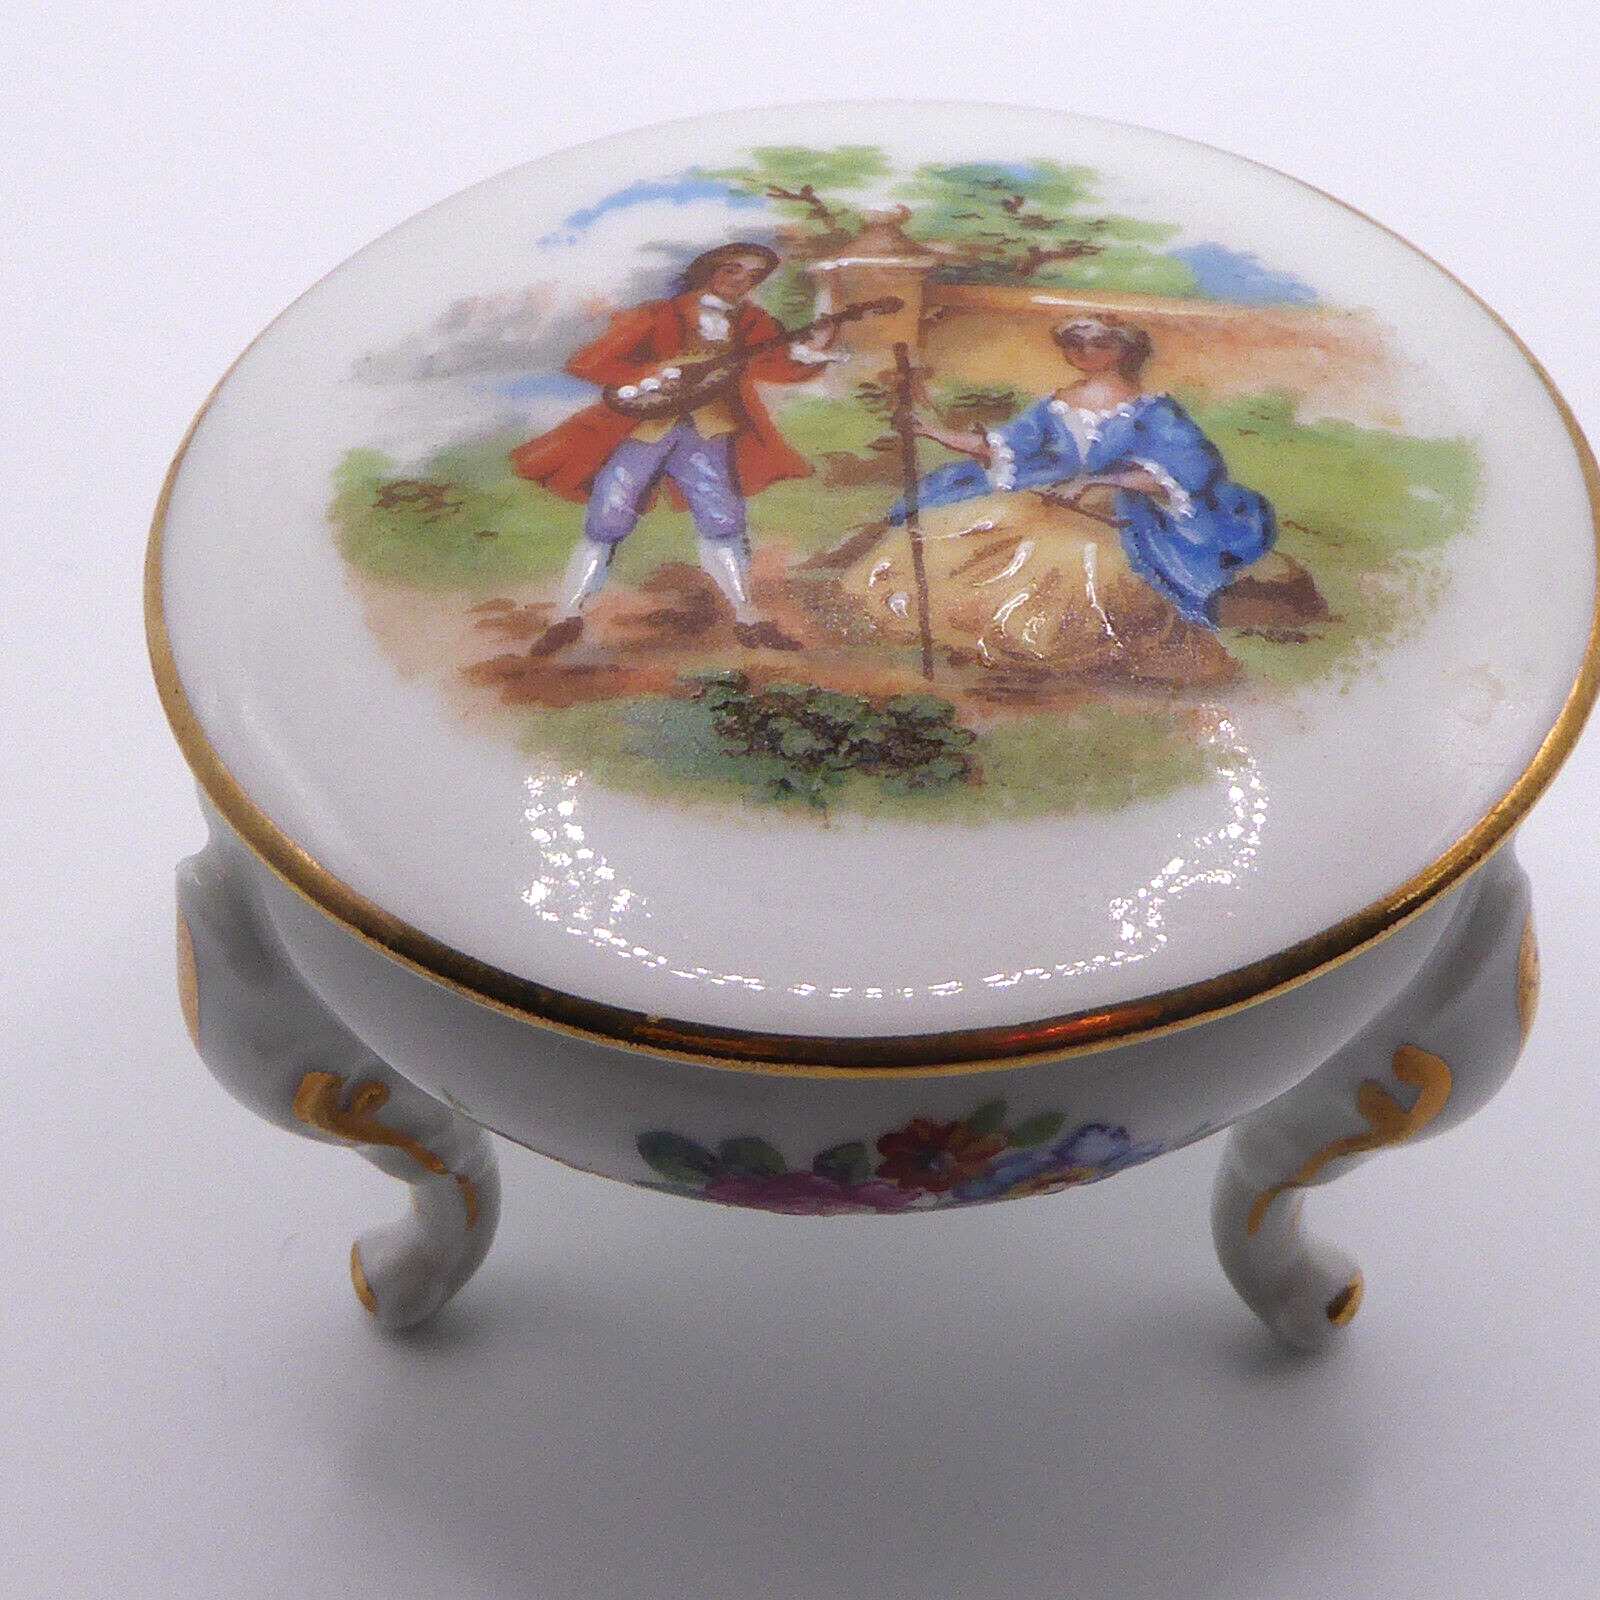 Vtg Limoges France ALCO Handpainted Small Trinket Footed Box Exc Cnd No Box